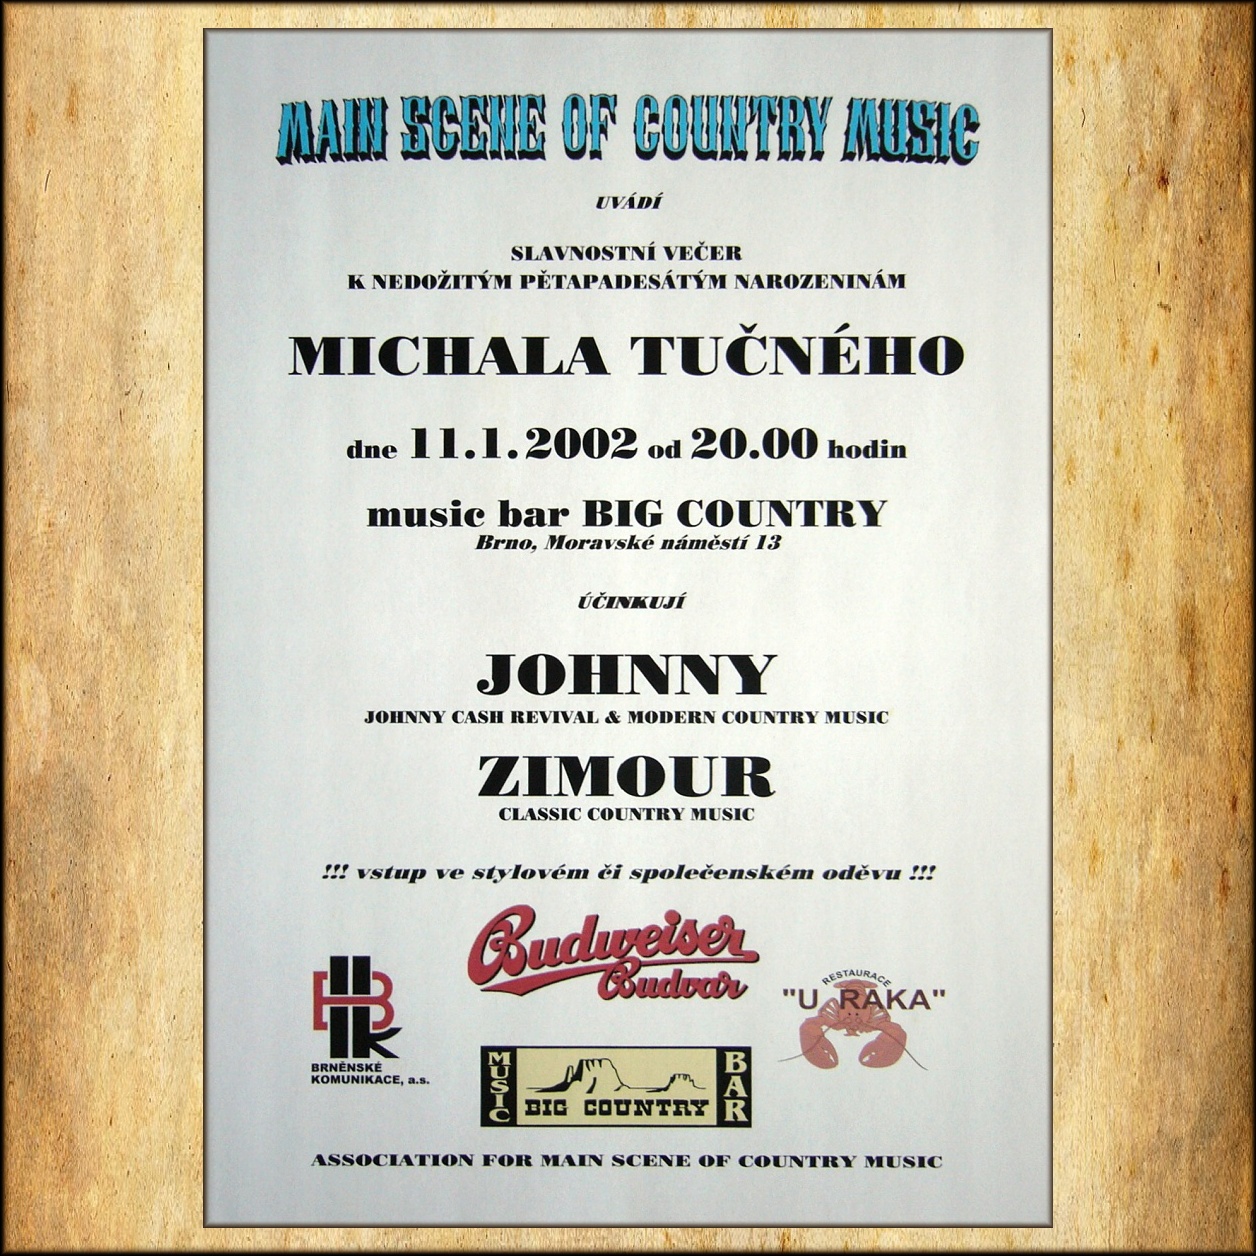 04 017 - King of the Country Music in Czech Republic